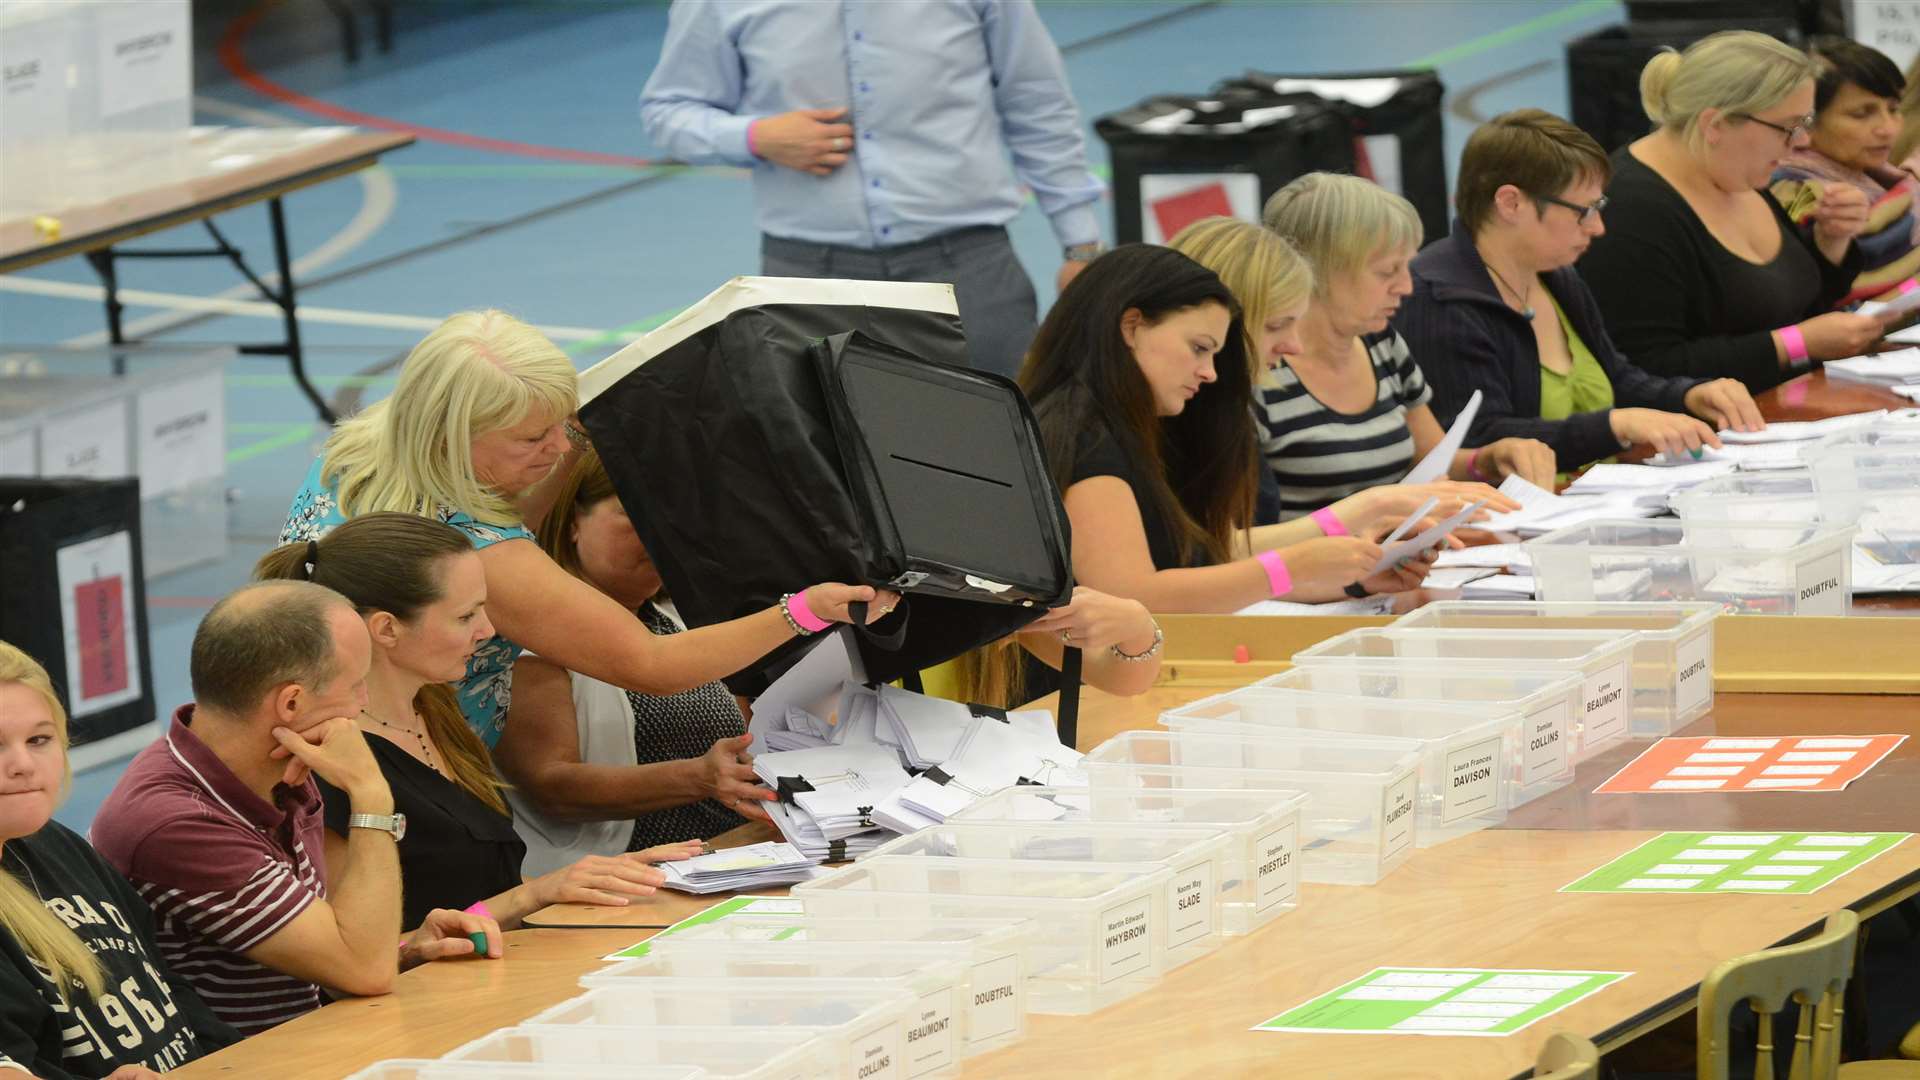 Counters get another pile of ballot papers to count. Picture: Gary Browne/KM Group